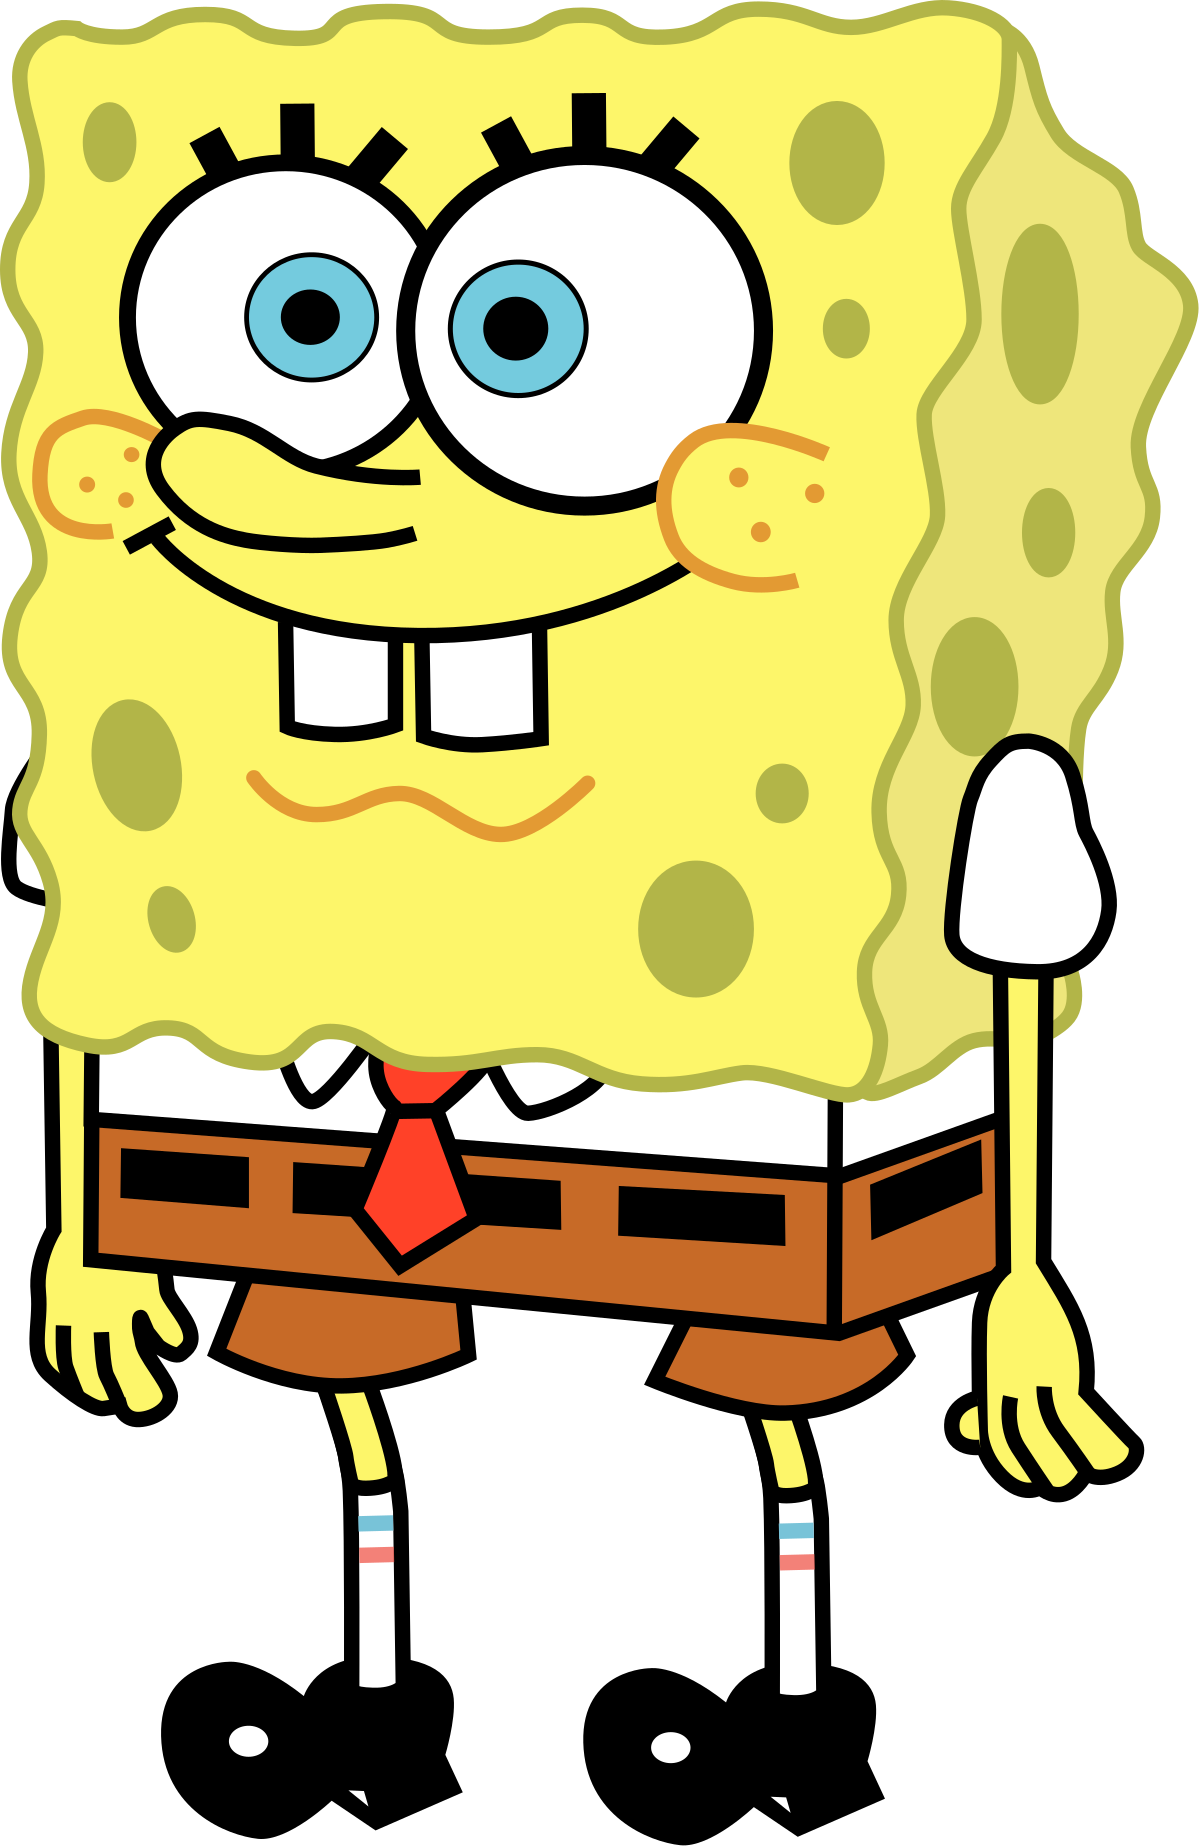 Spongebob Squarepants (character) PNG Transparent Background, Free Download  #44244 - FreeIconsPNG